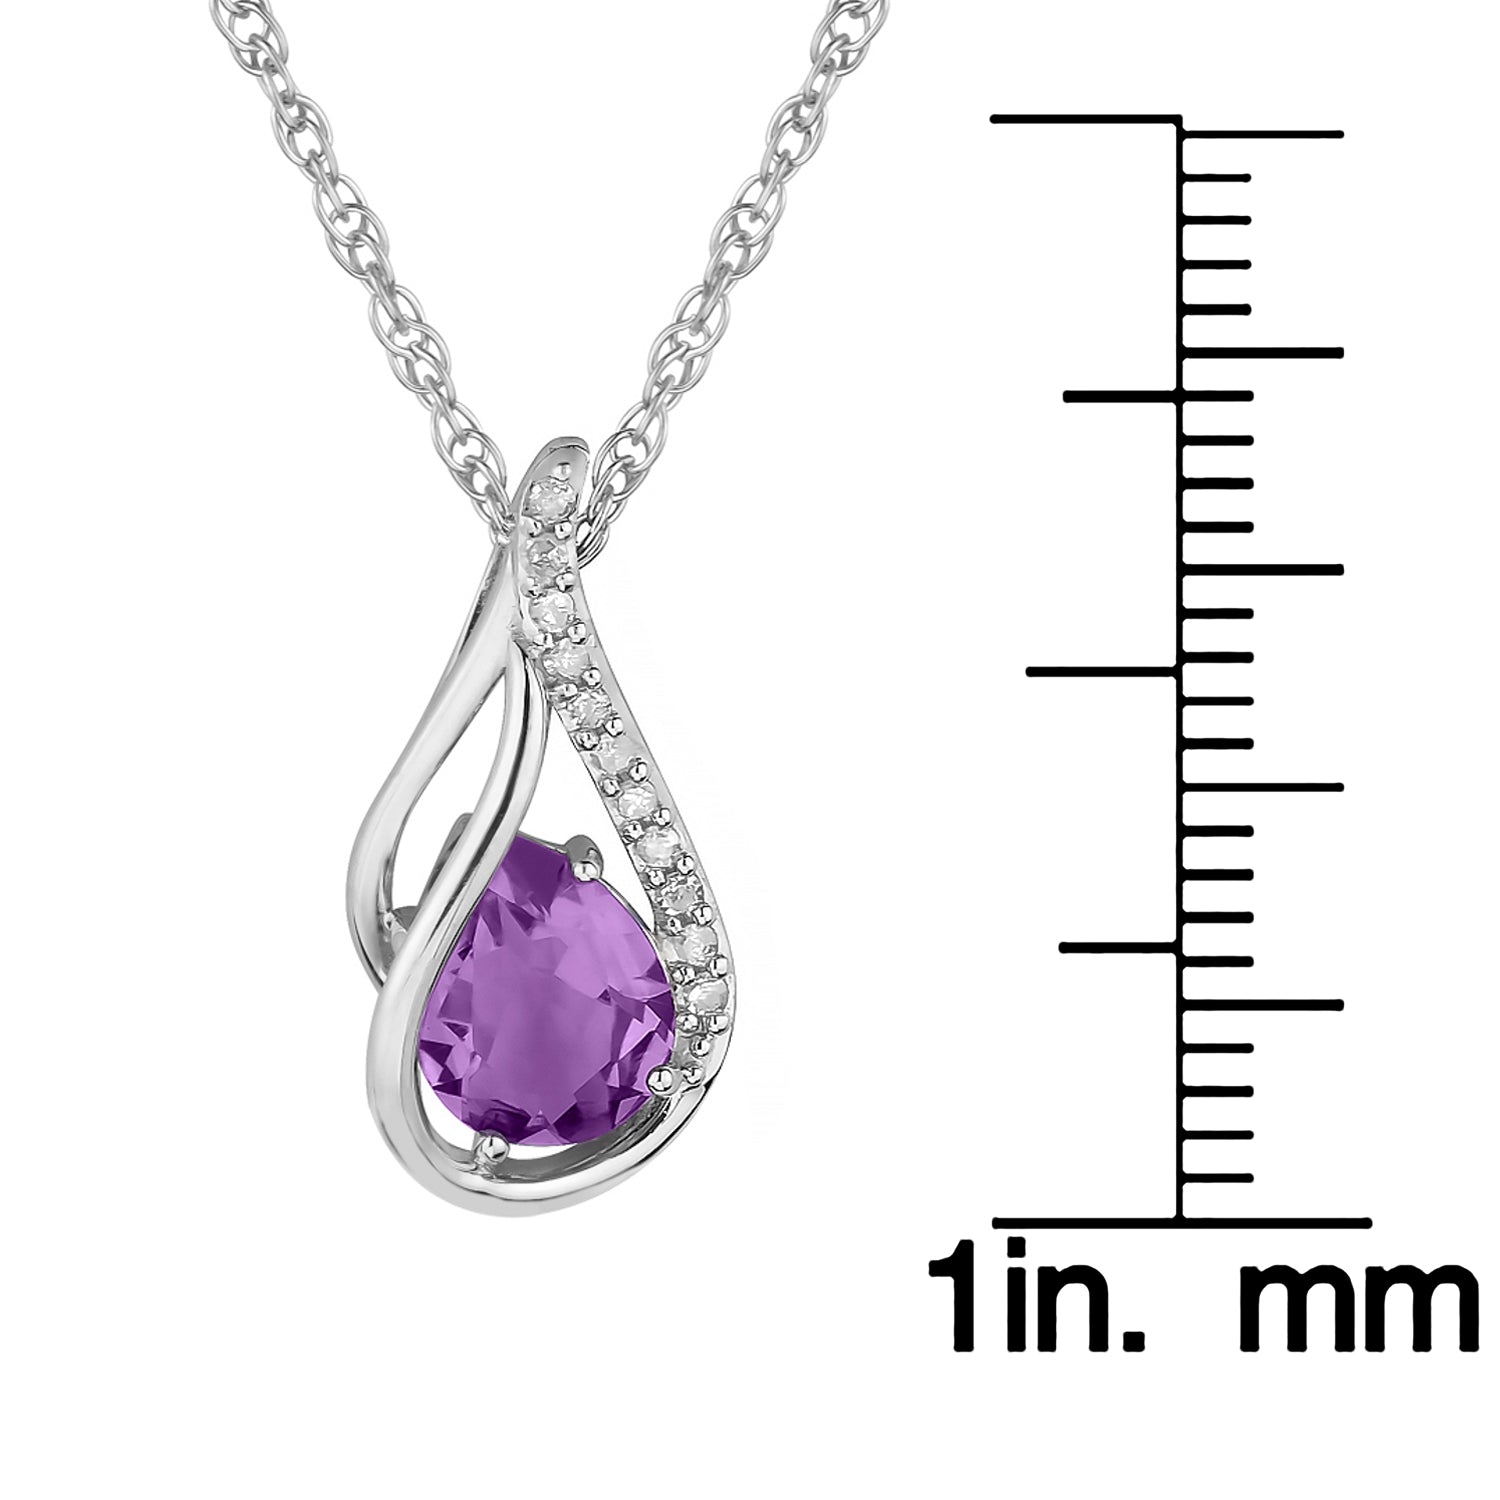 10k White Gold Genuine Pear shape Amethyst and Diamond Halo Drop Pendant Necklace